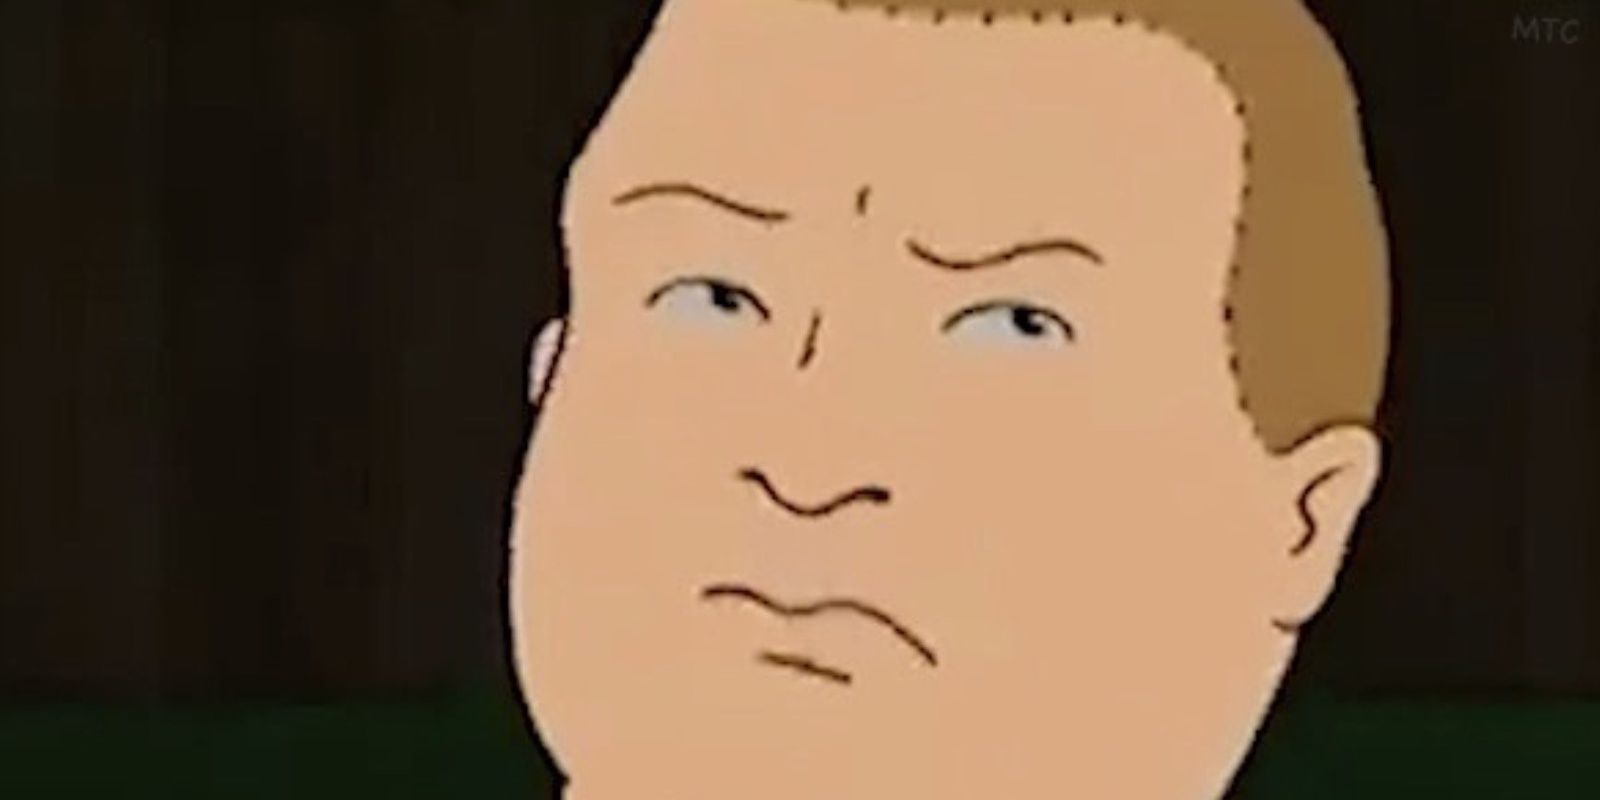 Bobby Hill Pulling A Sour Face Cropped